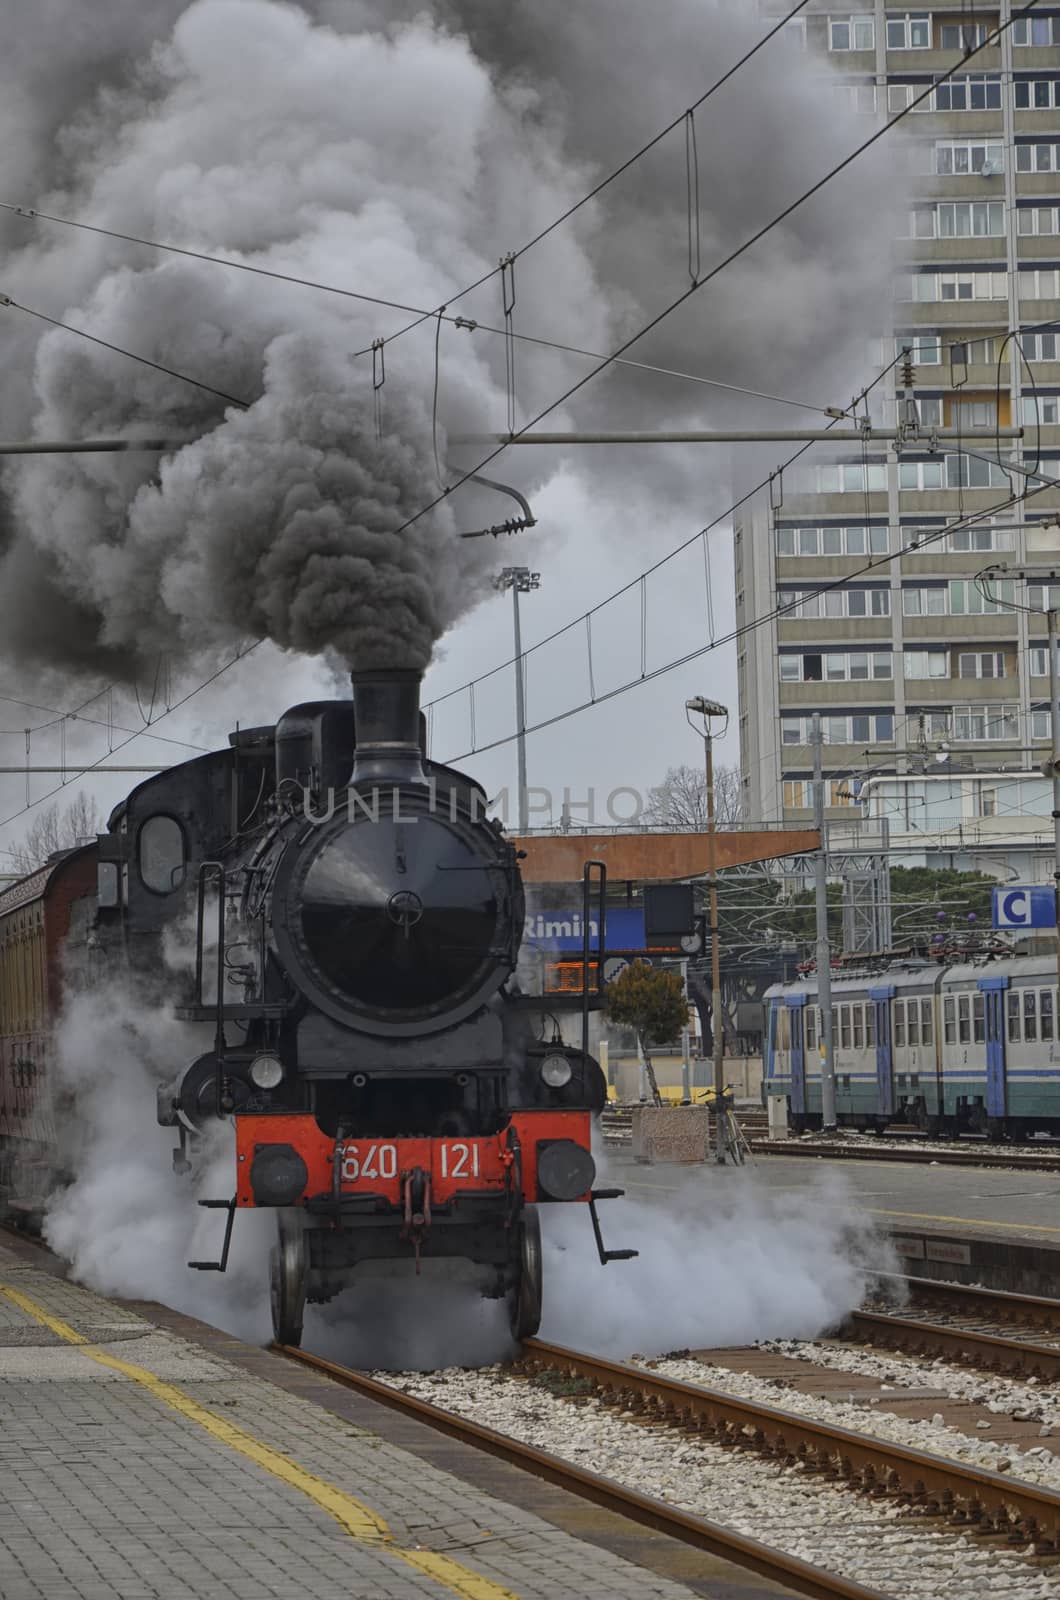 View of steam locomotive leaving the station